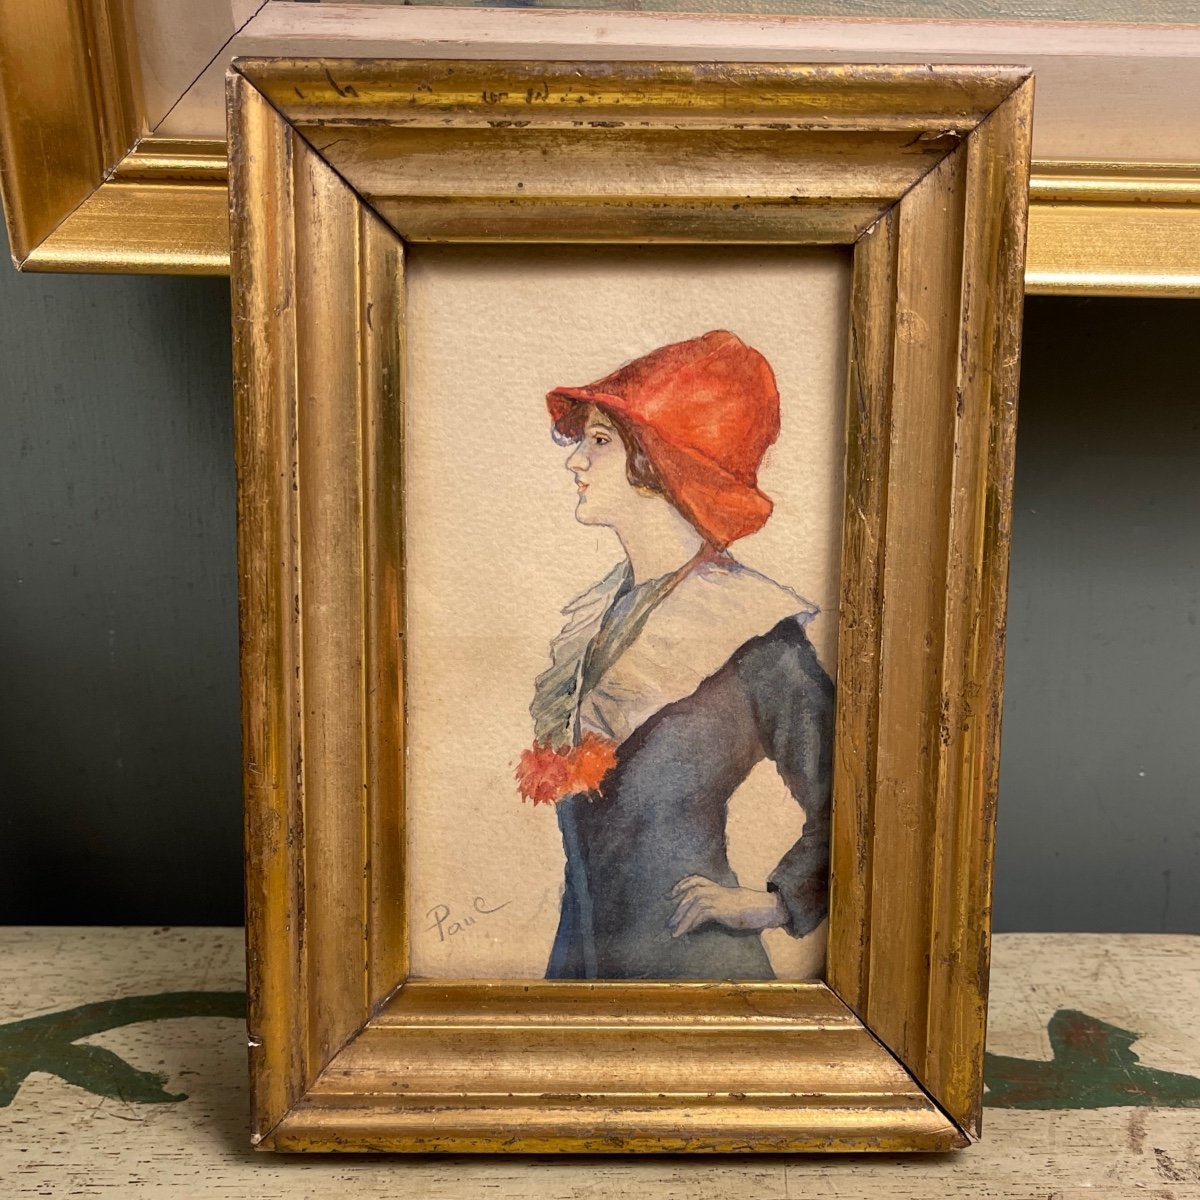 Woman In Red Hat